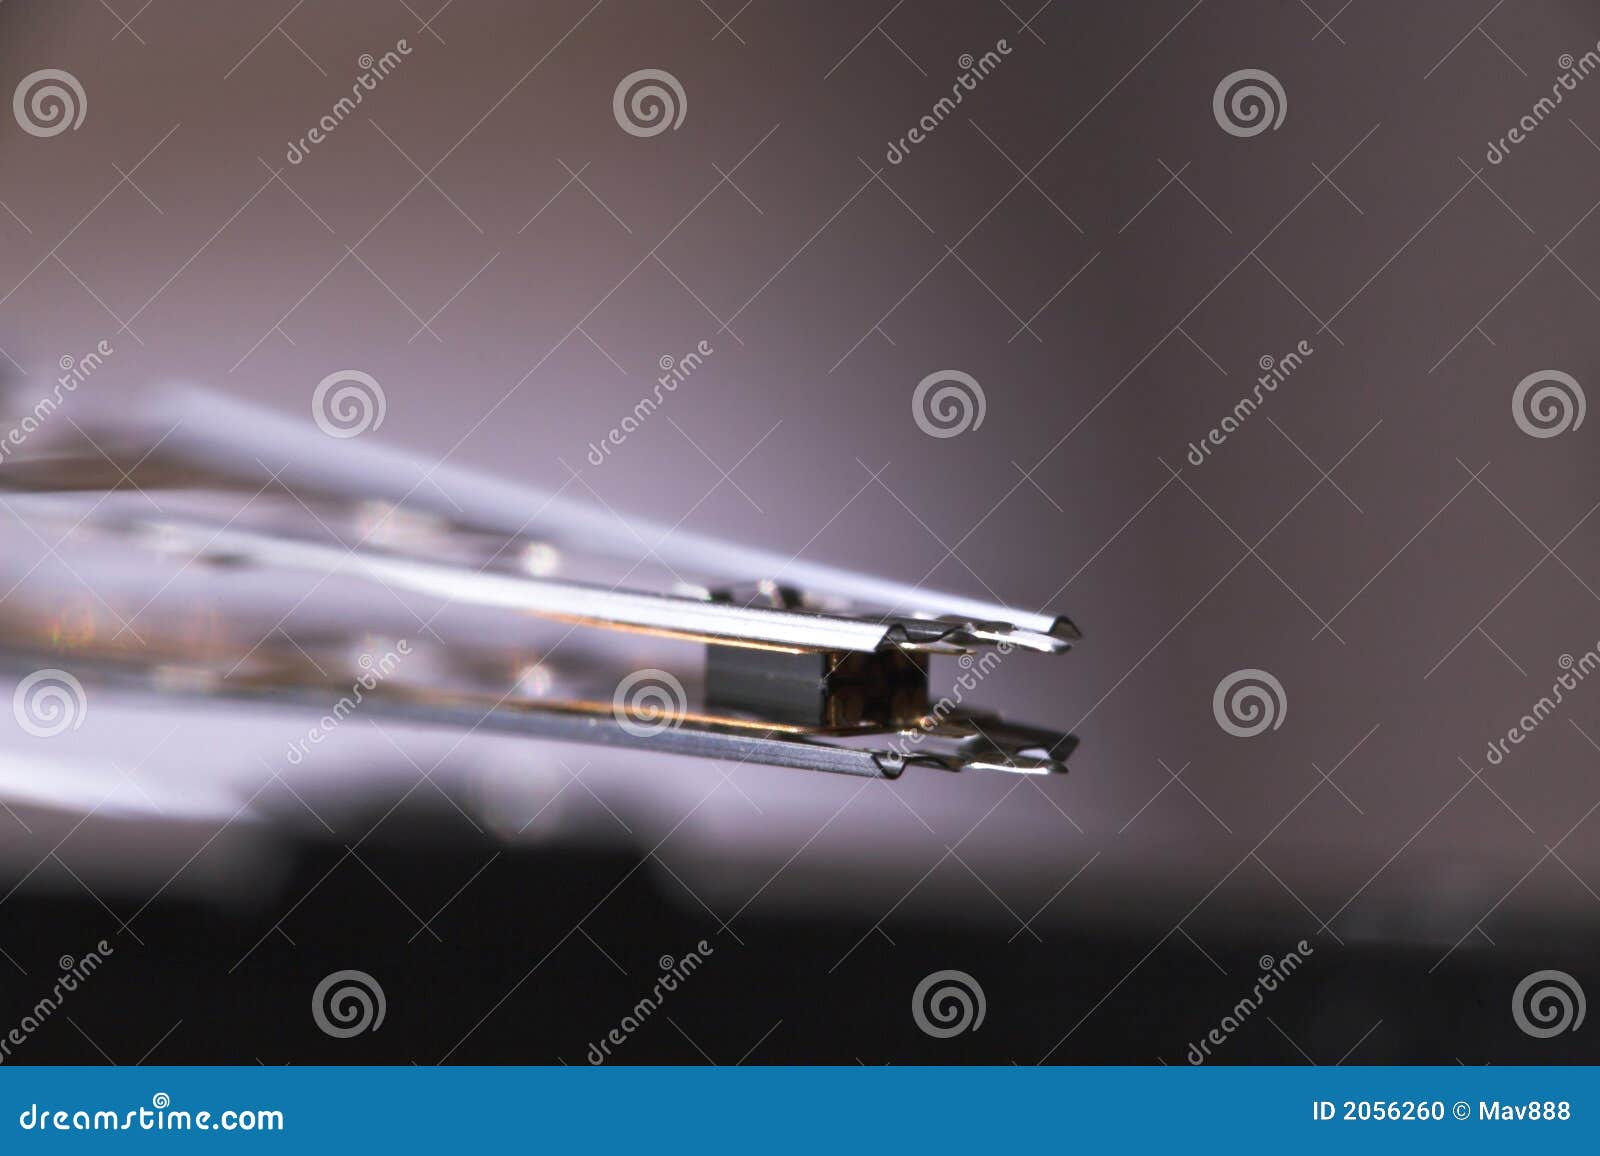 Hard disk drive head stock photo. Image of office, disk - 2056260